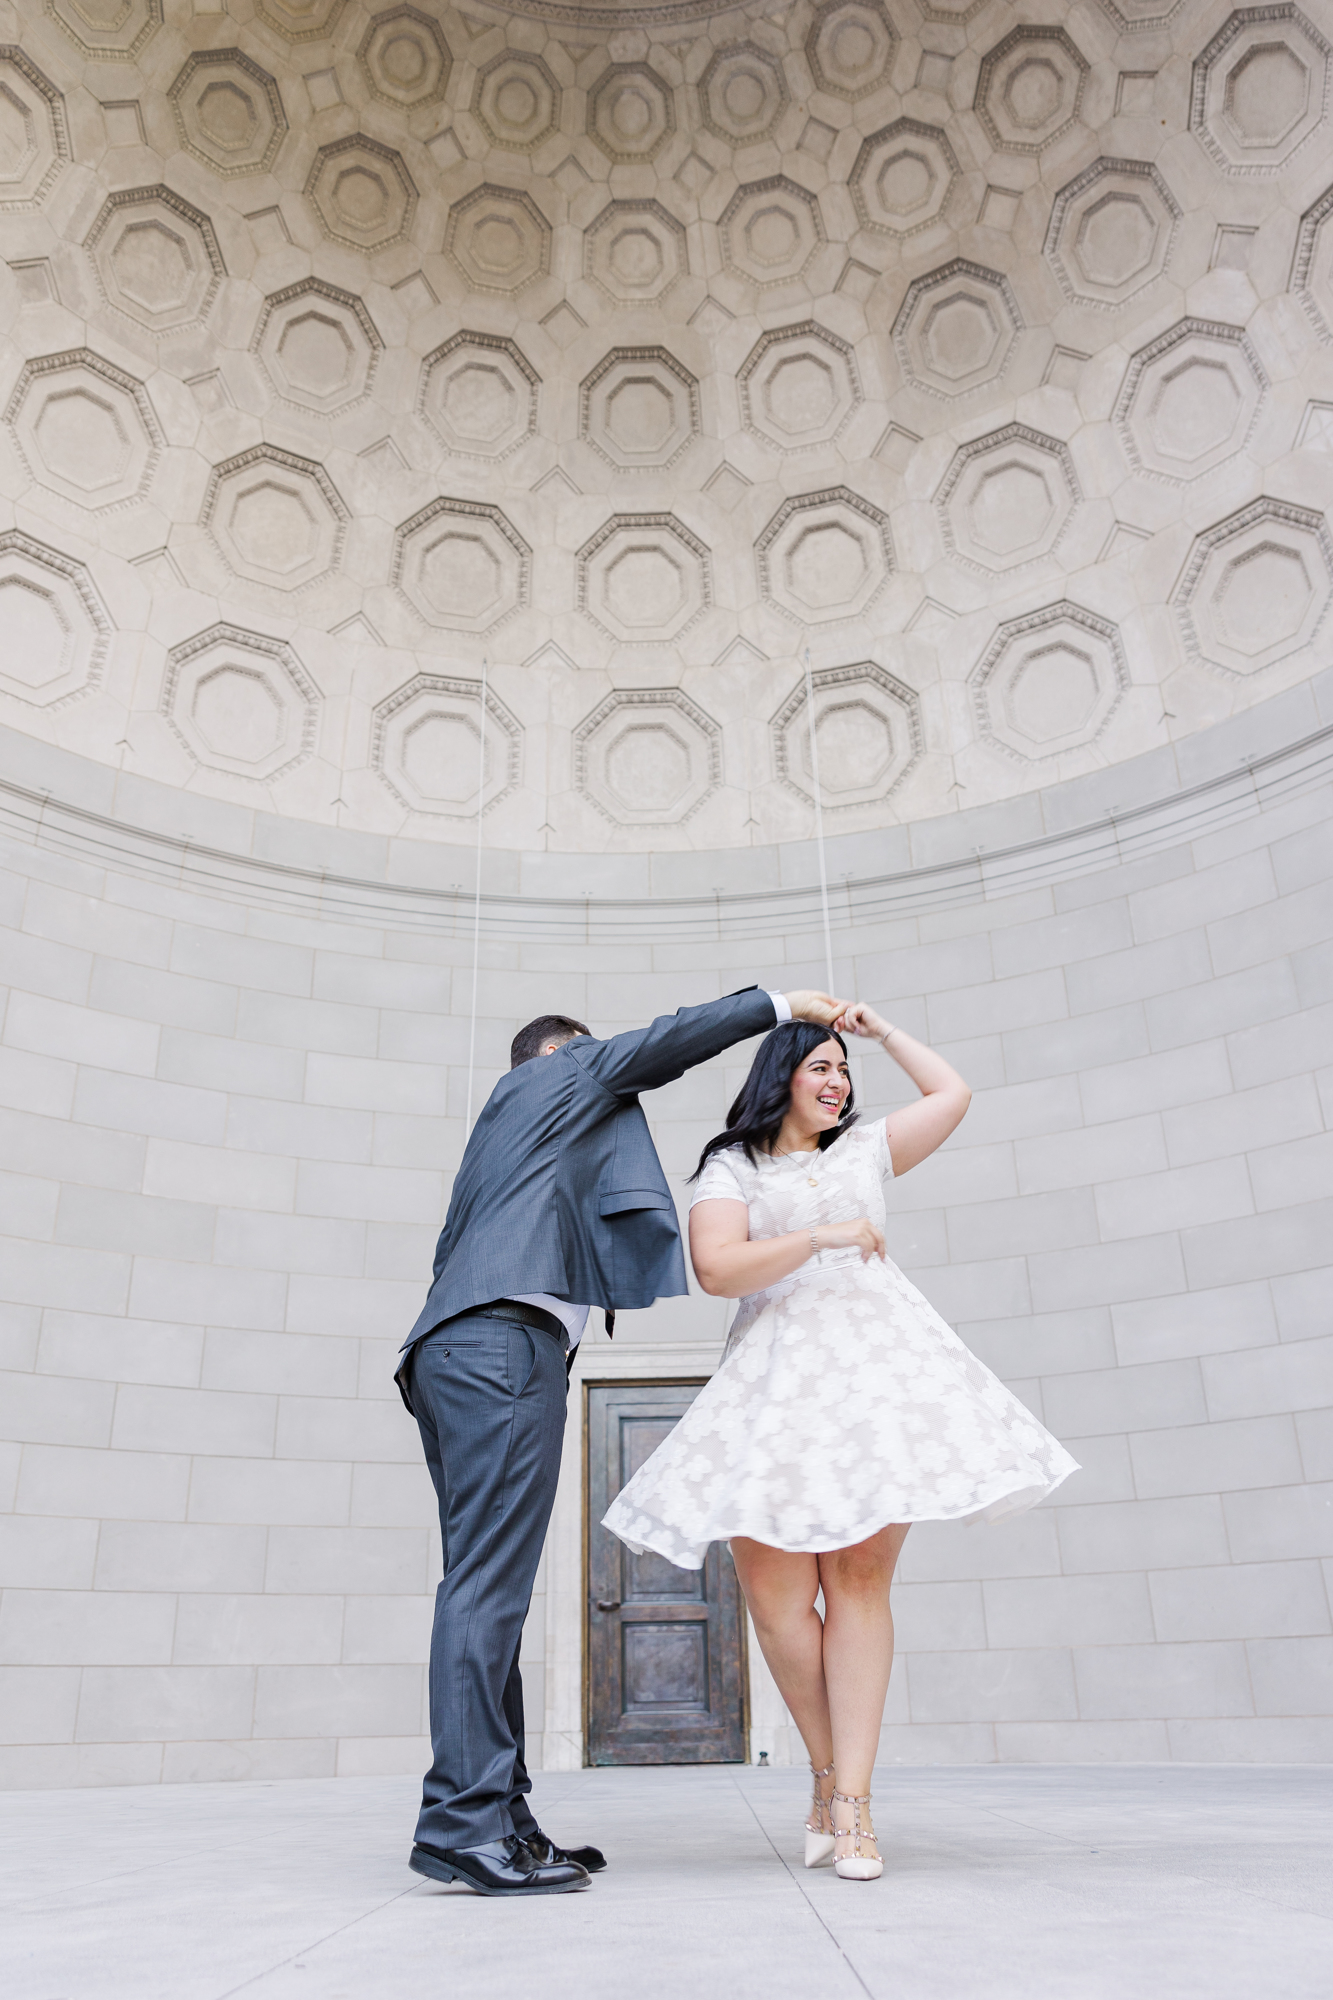 Striking Central Park Engagement Photos in New York